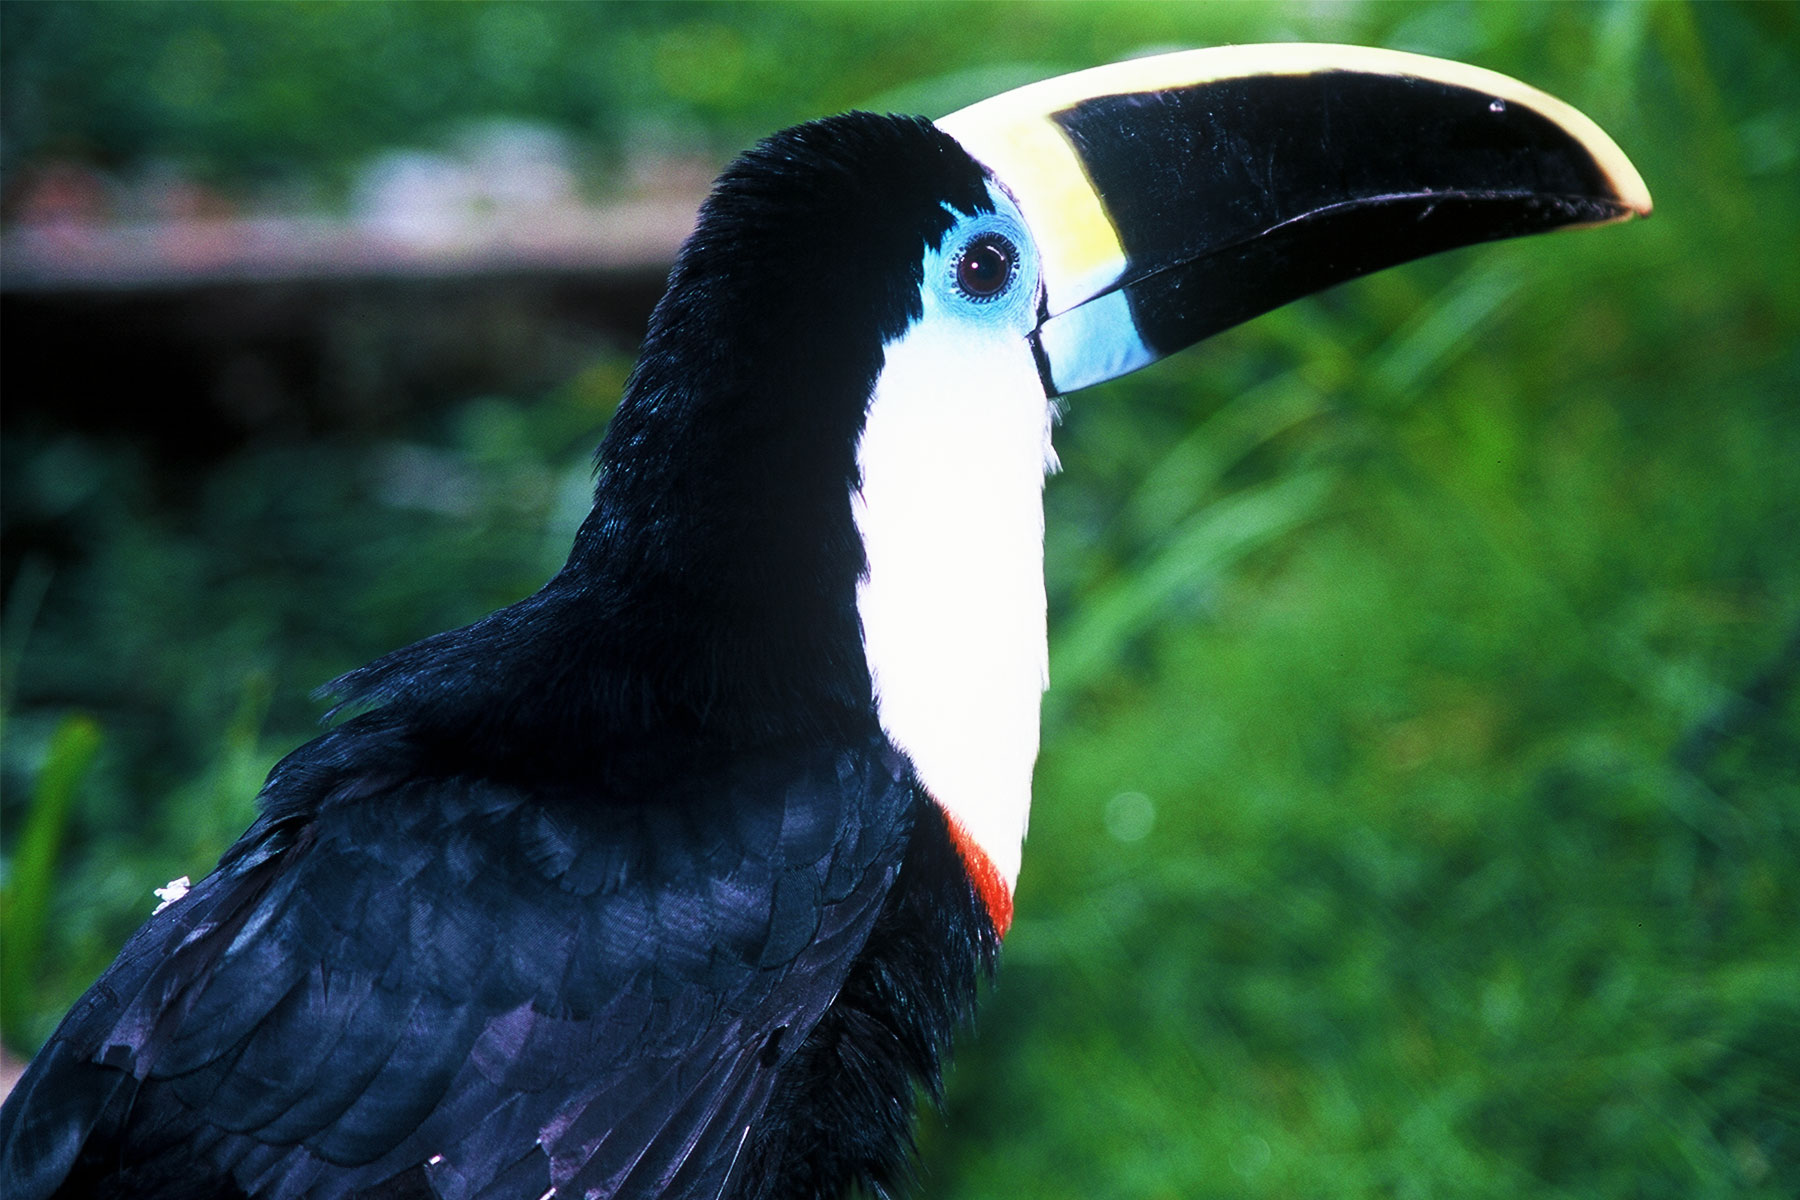 colorful Toucan | Tiputini Biodiversity Station | Amazon research with Dr Steven A Martin | Environmental Studies